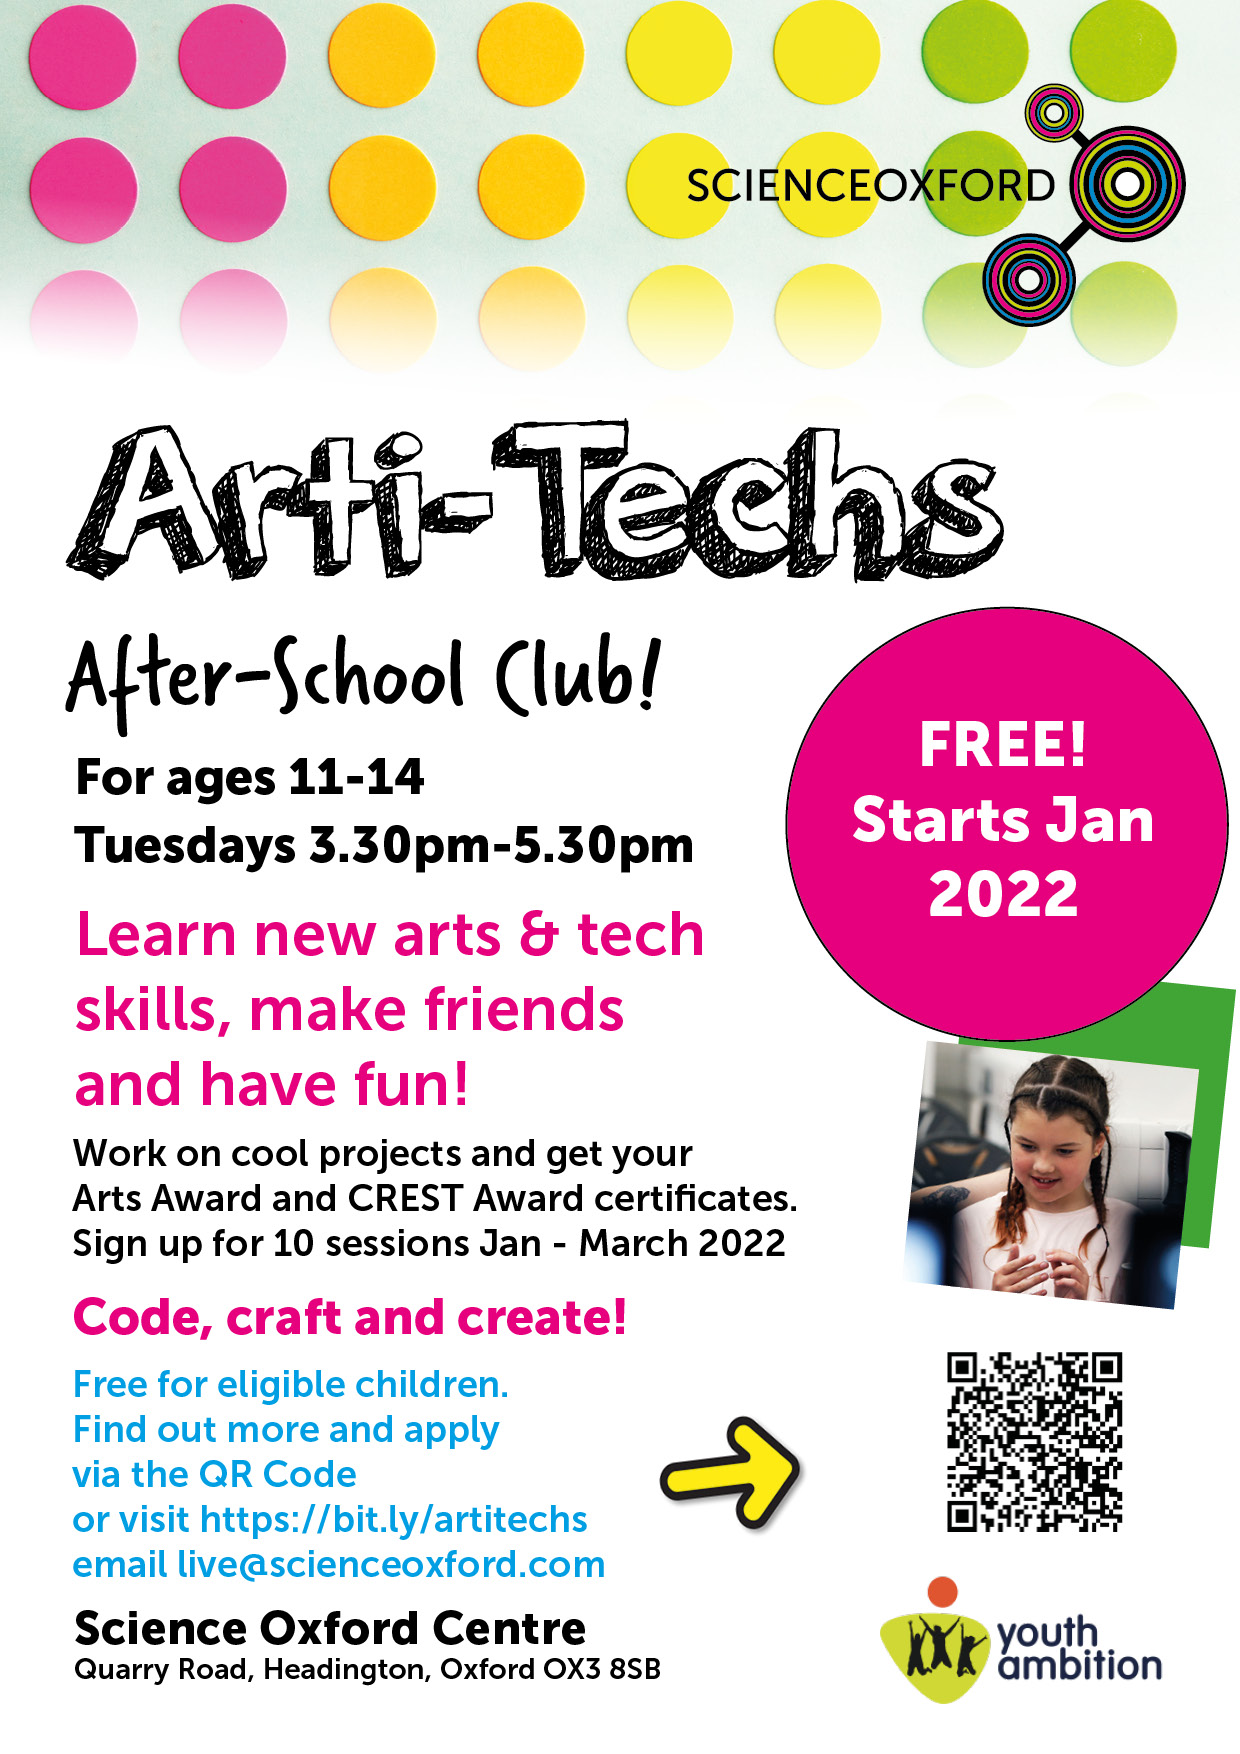 Arti-Techs (Ages 11-14) After-school Club